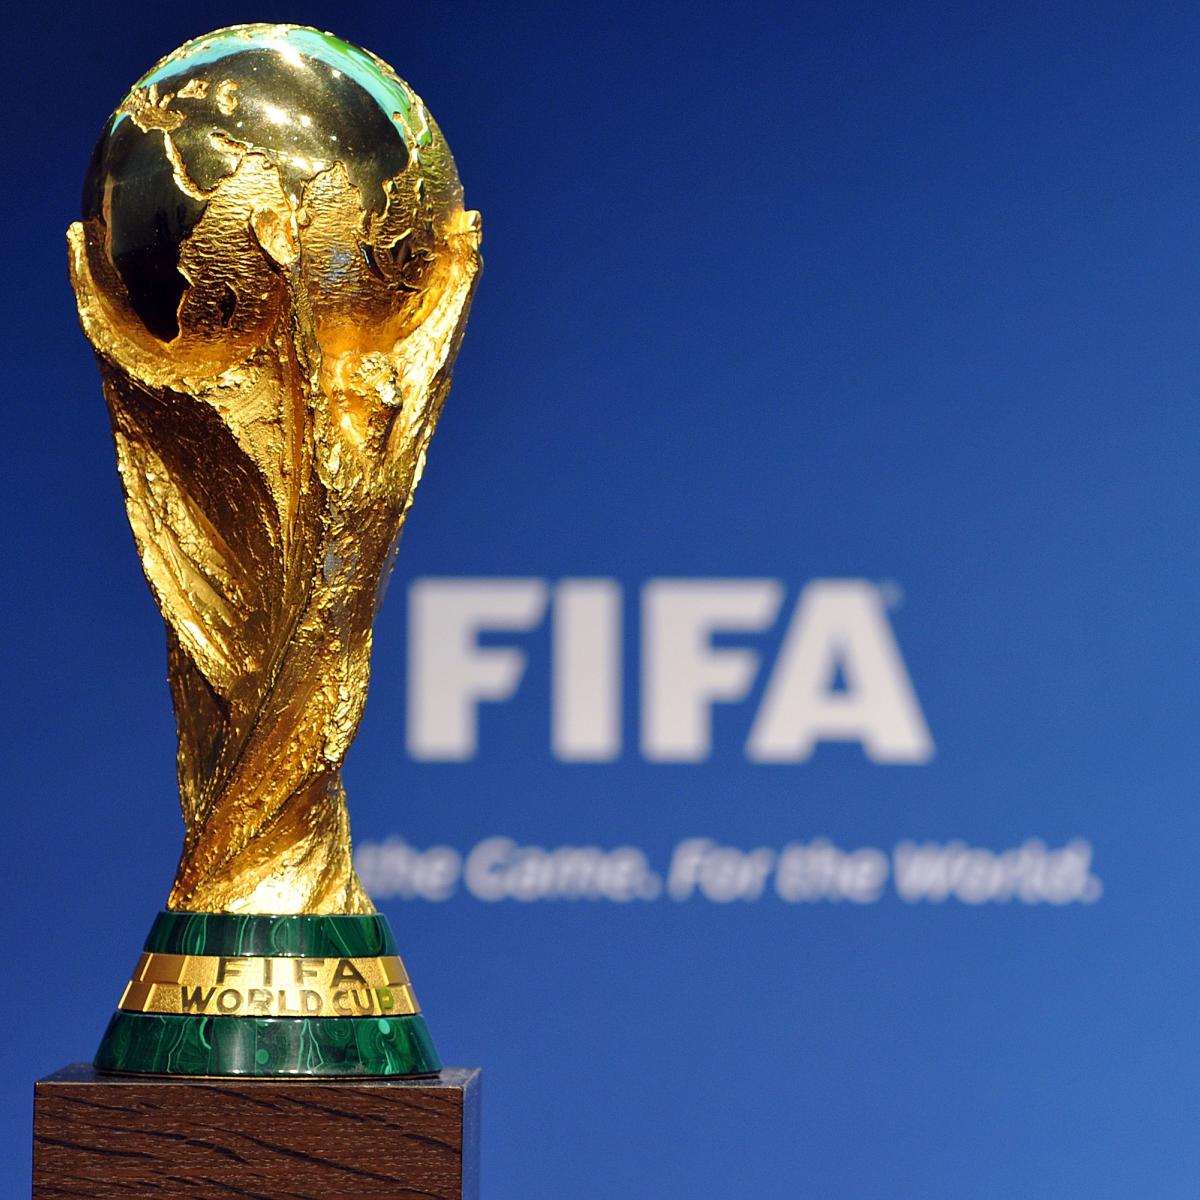 2014 FIFA World Cup Draw: So we're not using the world rankings to